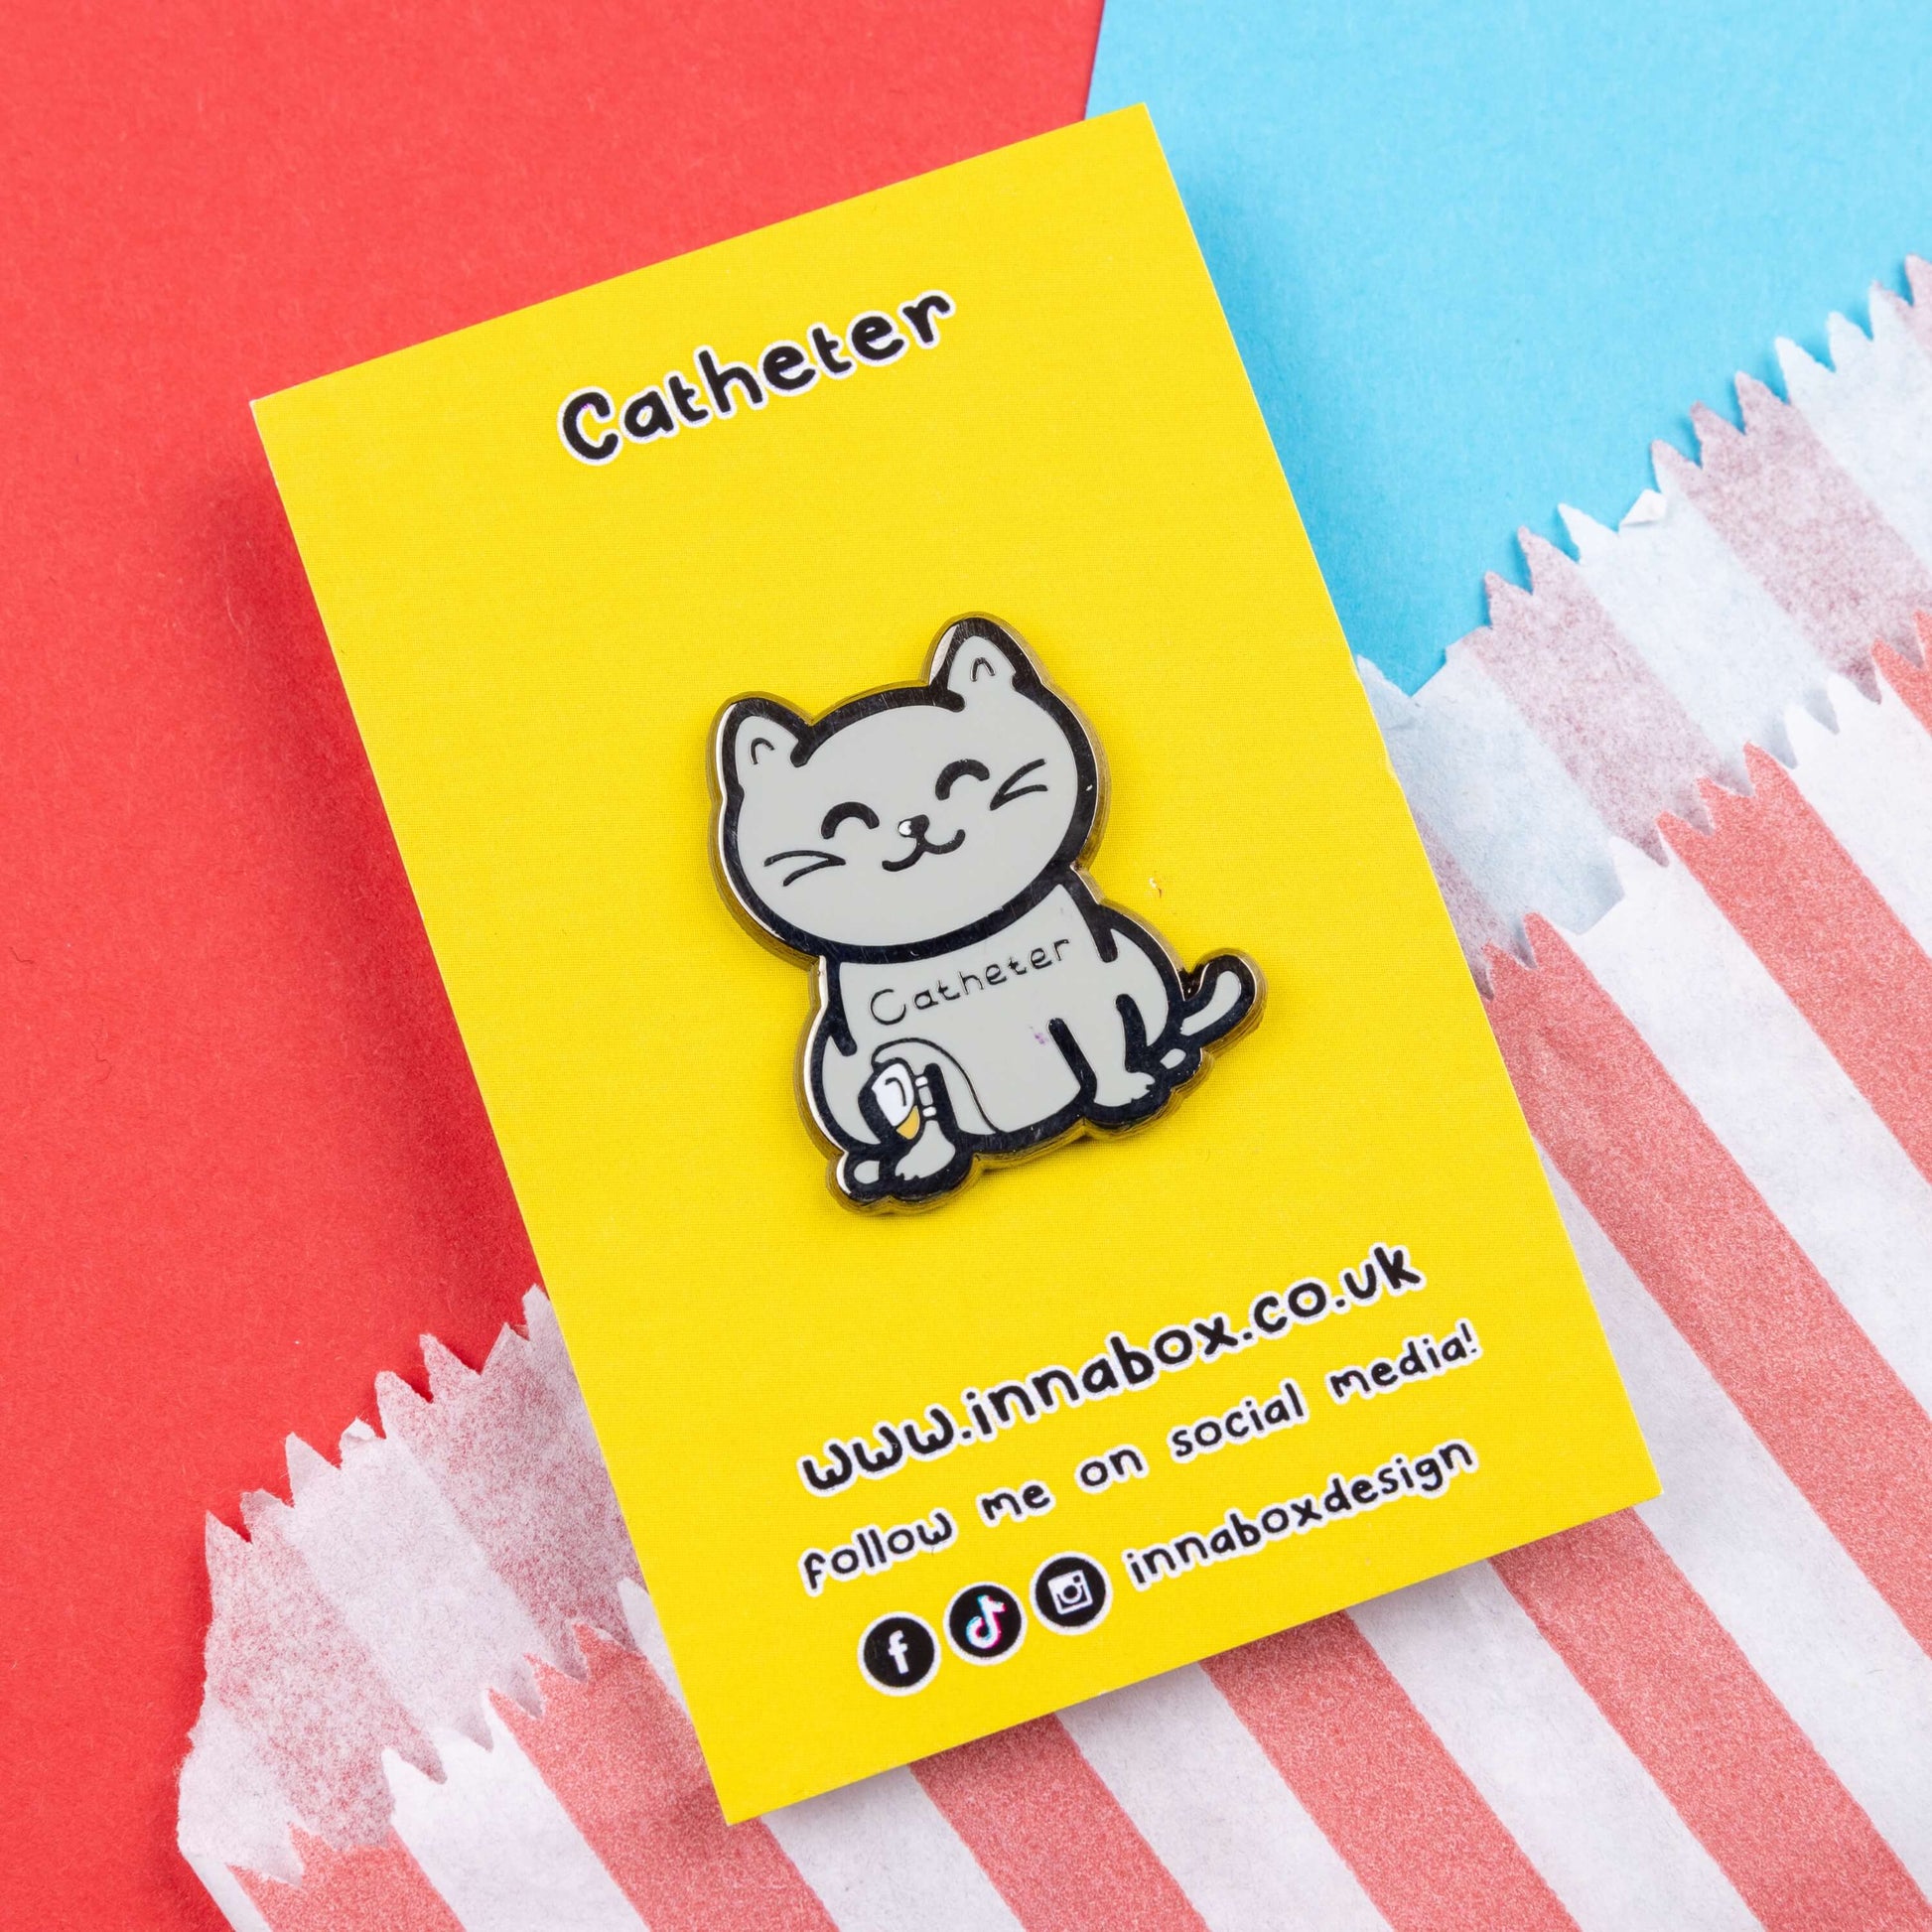 The Catheter Enamel Pin - Catheter on bright yellow backing card laid on a red and blue card background. The pin is a grey smiling cat sat down with a urine drainage Urostomy pouch strapped to its right leg and text across its chest reading 'catheter'. The pin is designed to raise awareness for bladder problems such as UTIs and other chronic illnesses.